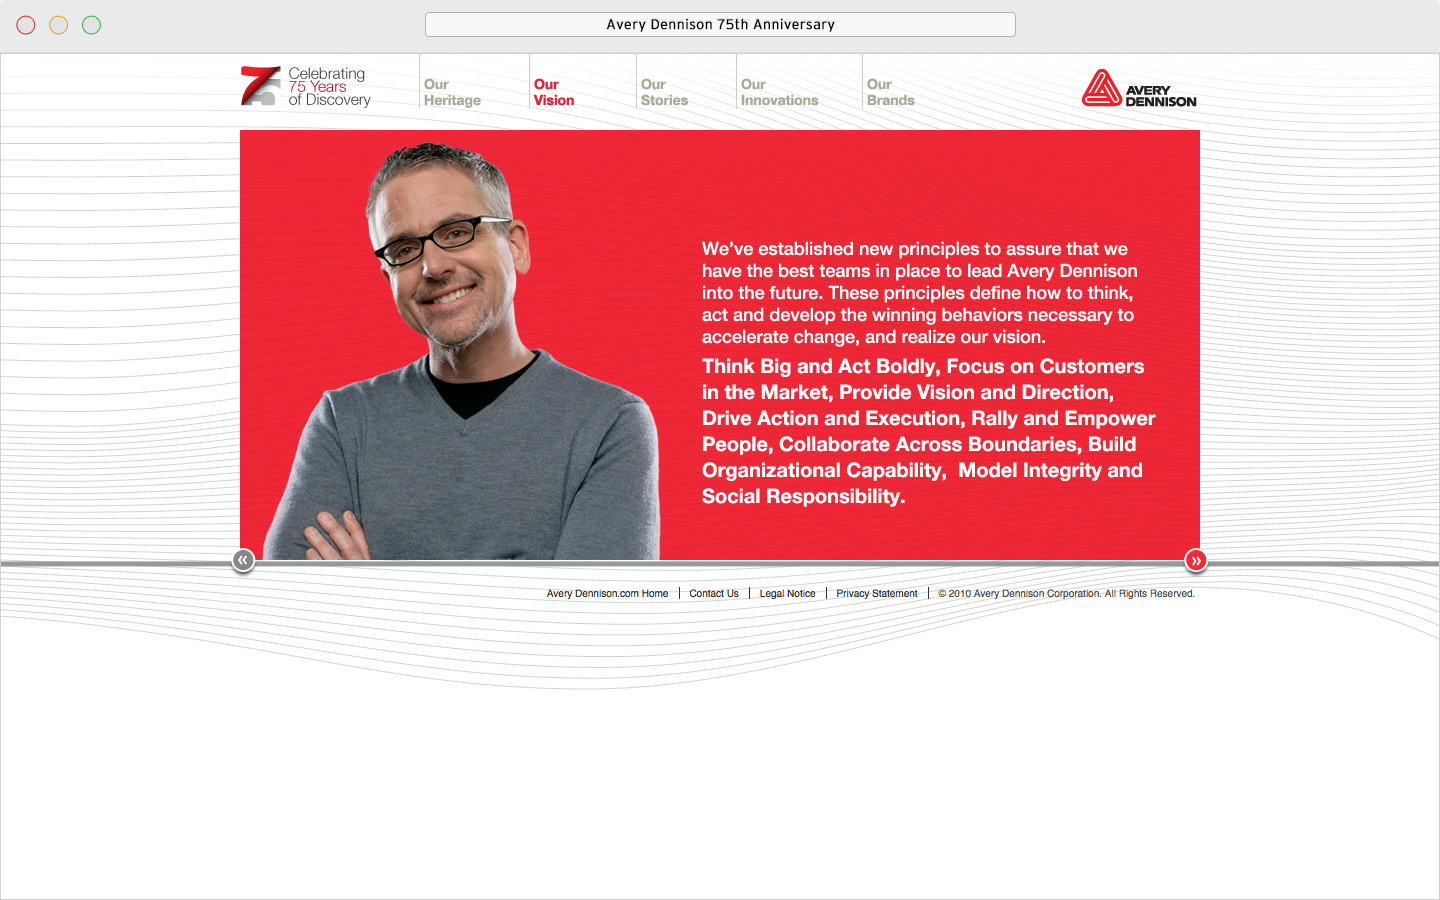 Avery Dennison 75th anniversary microsite Our Vision page